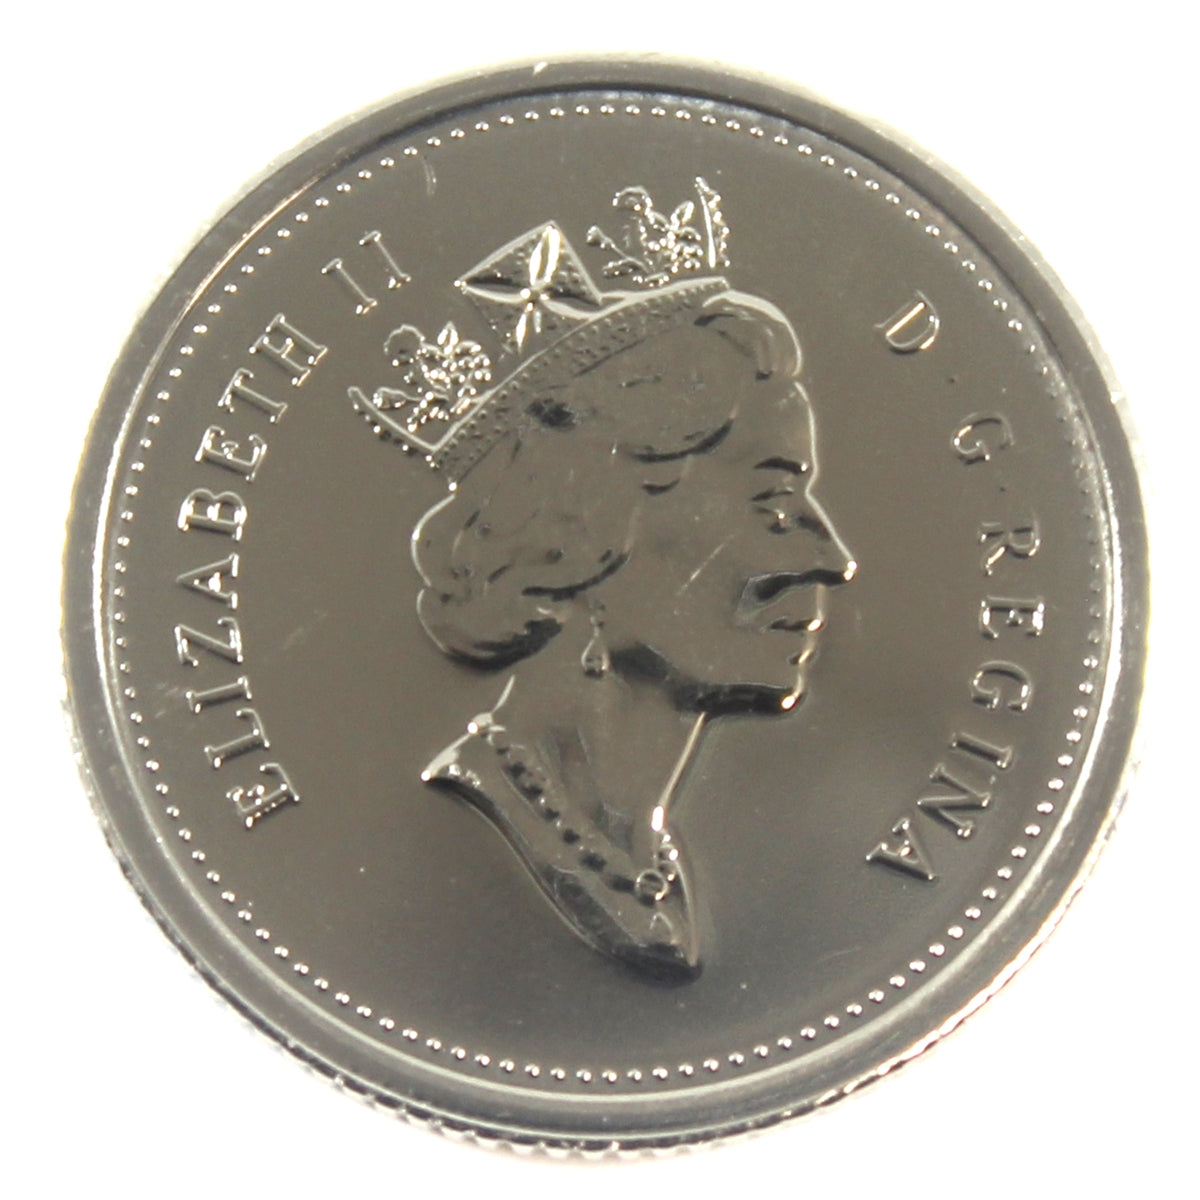 1998 Canada 10-cent Proof Like